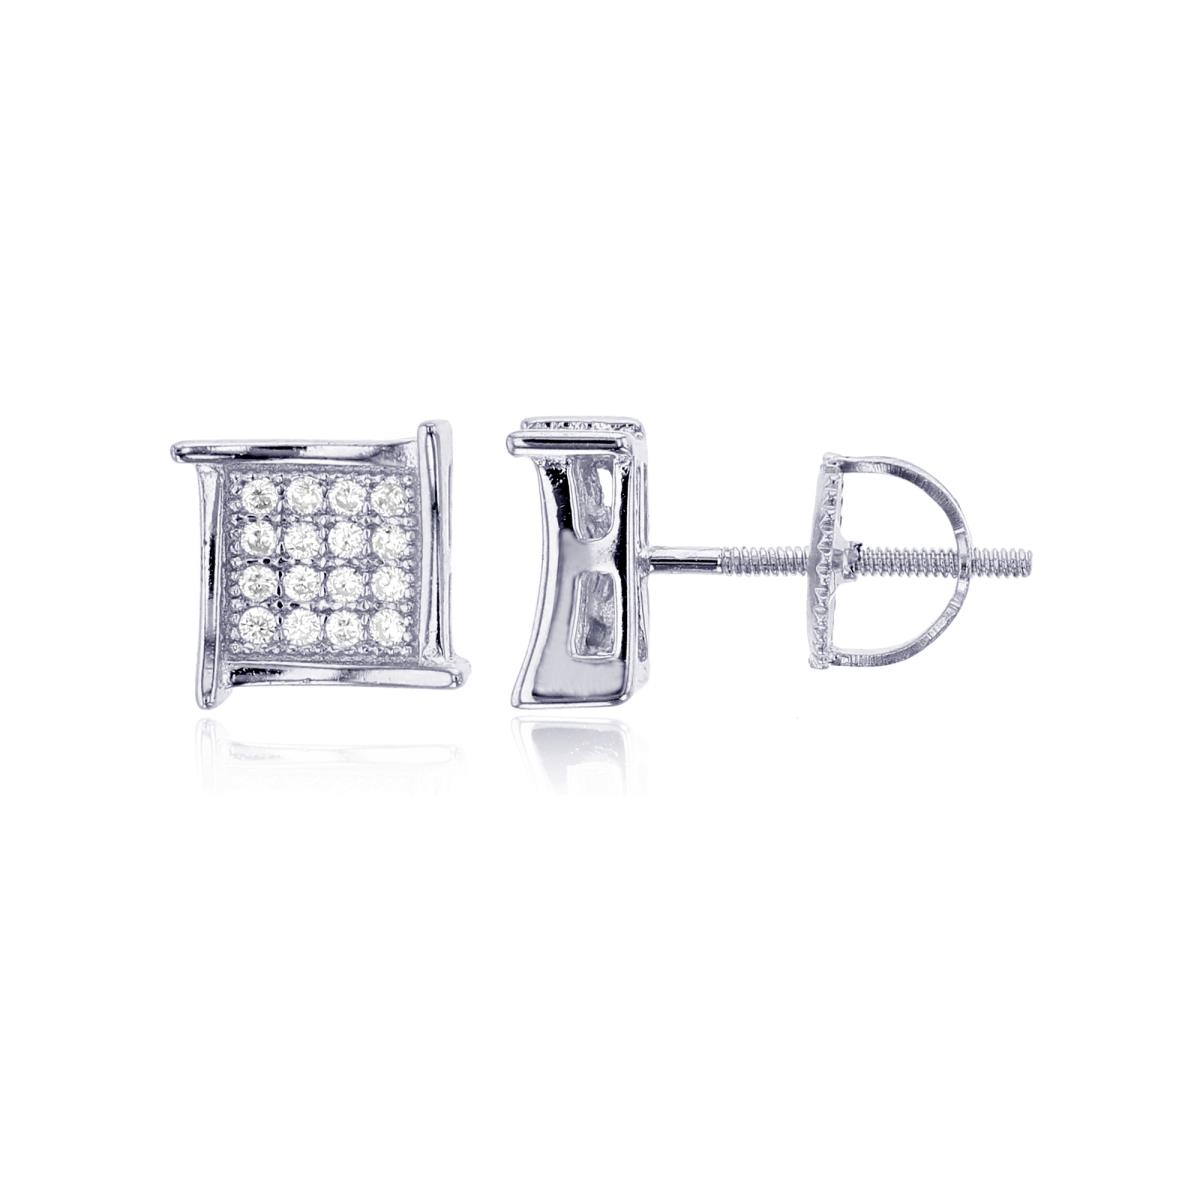 Sterling Silver 7.8x7.8mm Fancy Square Micropave Screwback Stud Earring